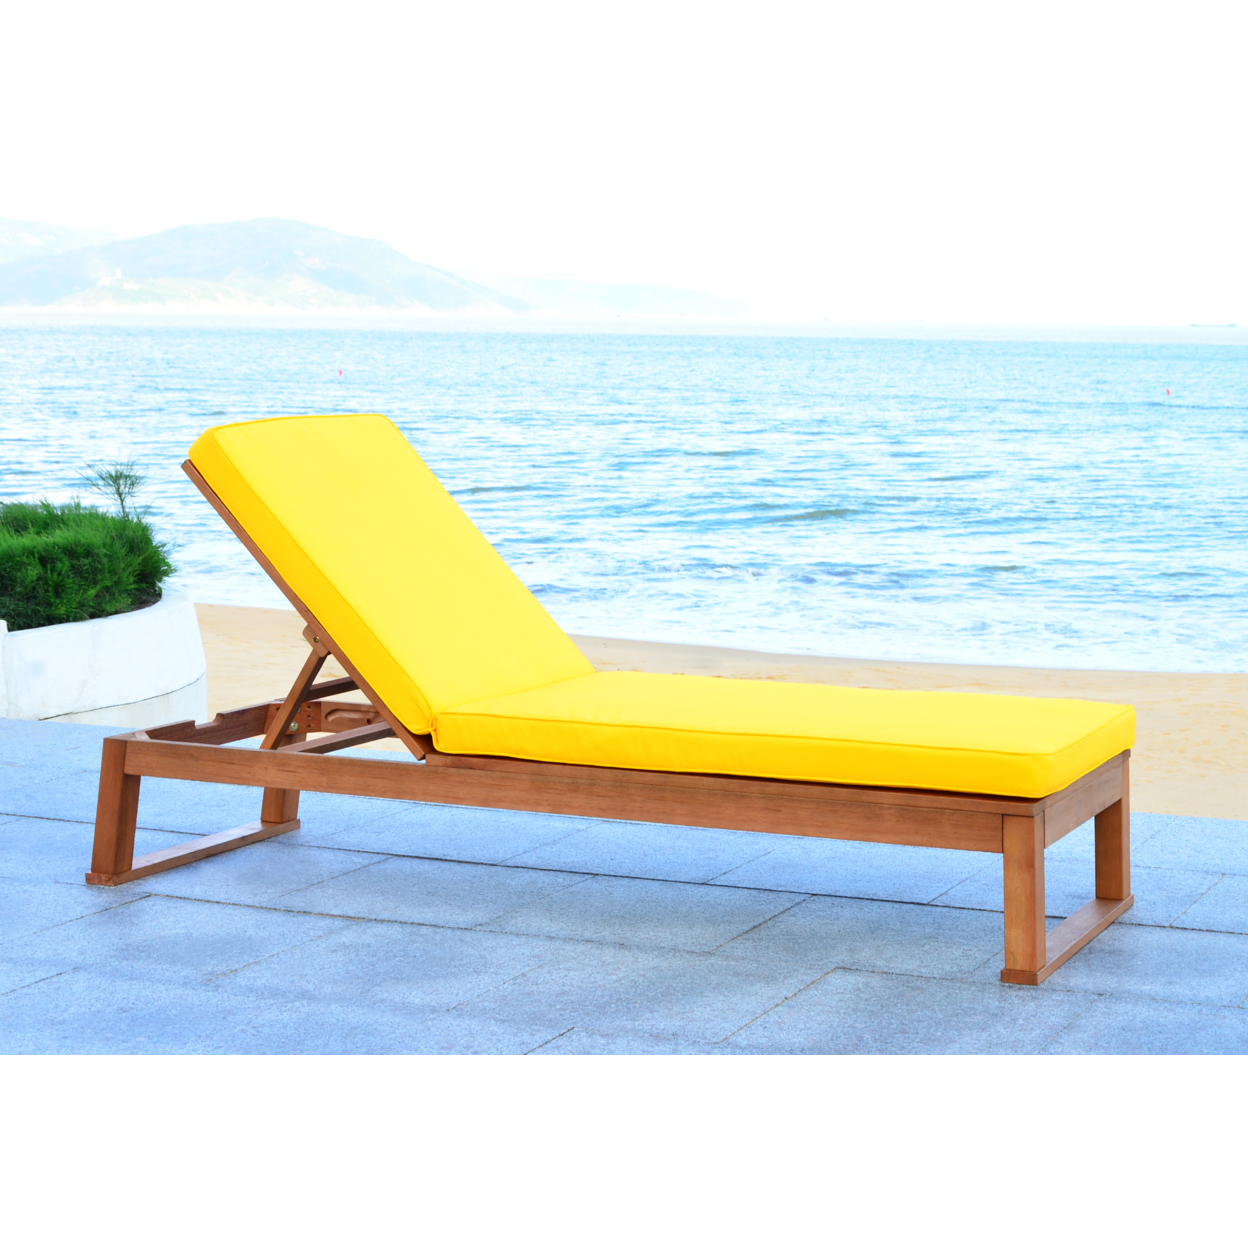 SAFAVIEH Outdoor Collection Solano Chaise Sunlounger Natural/Yellow